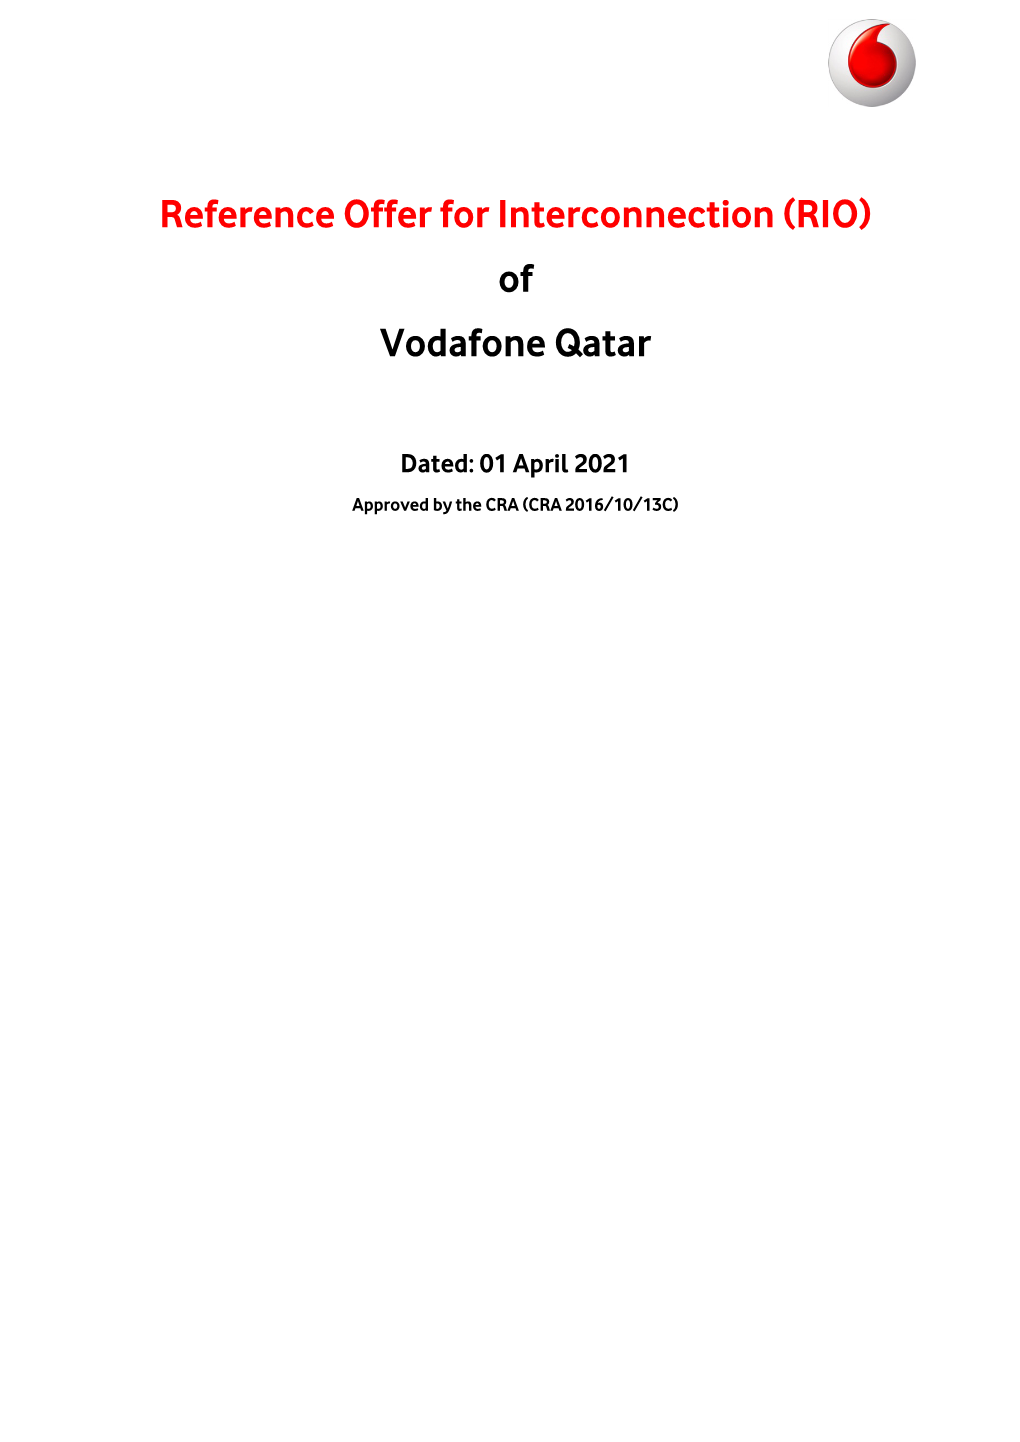 Reference Offer for Interconnection (RIO) of Vodafone Qatar